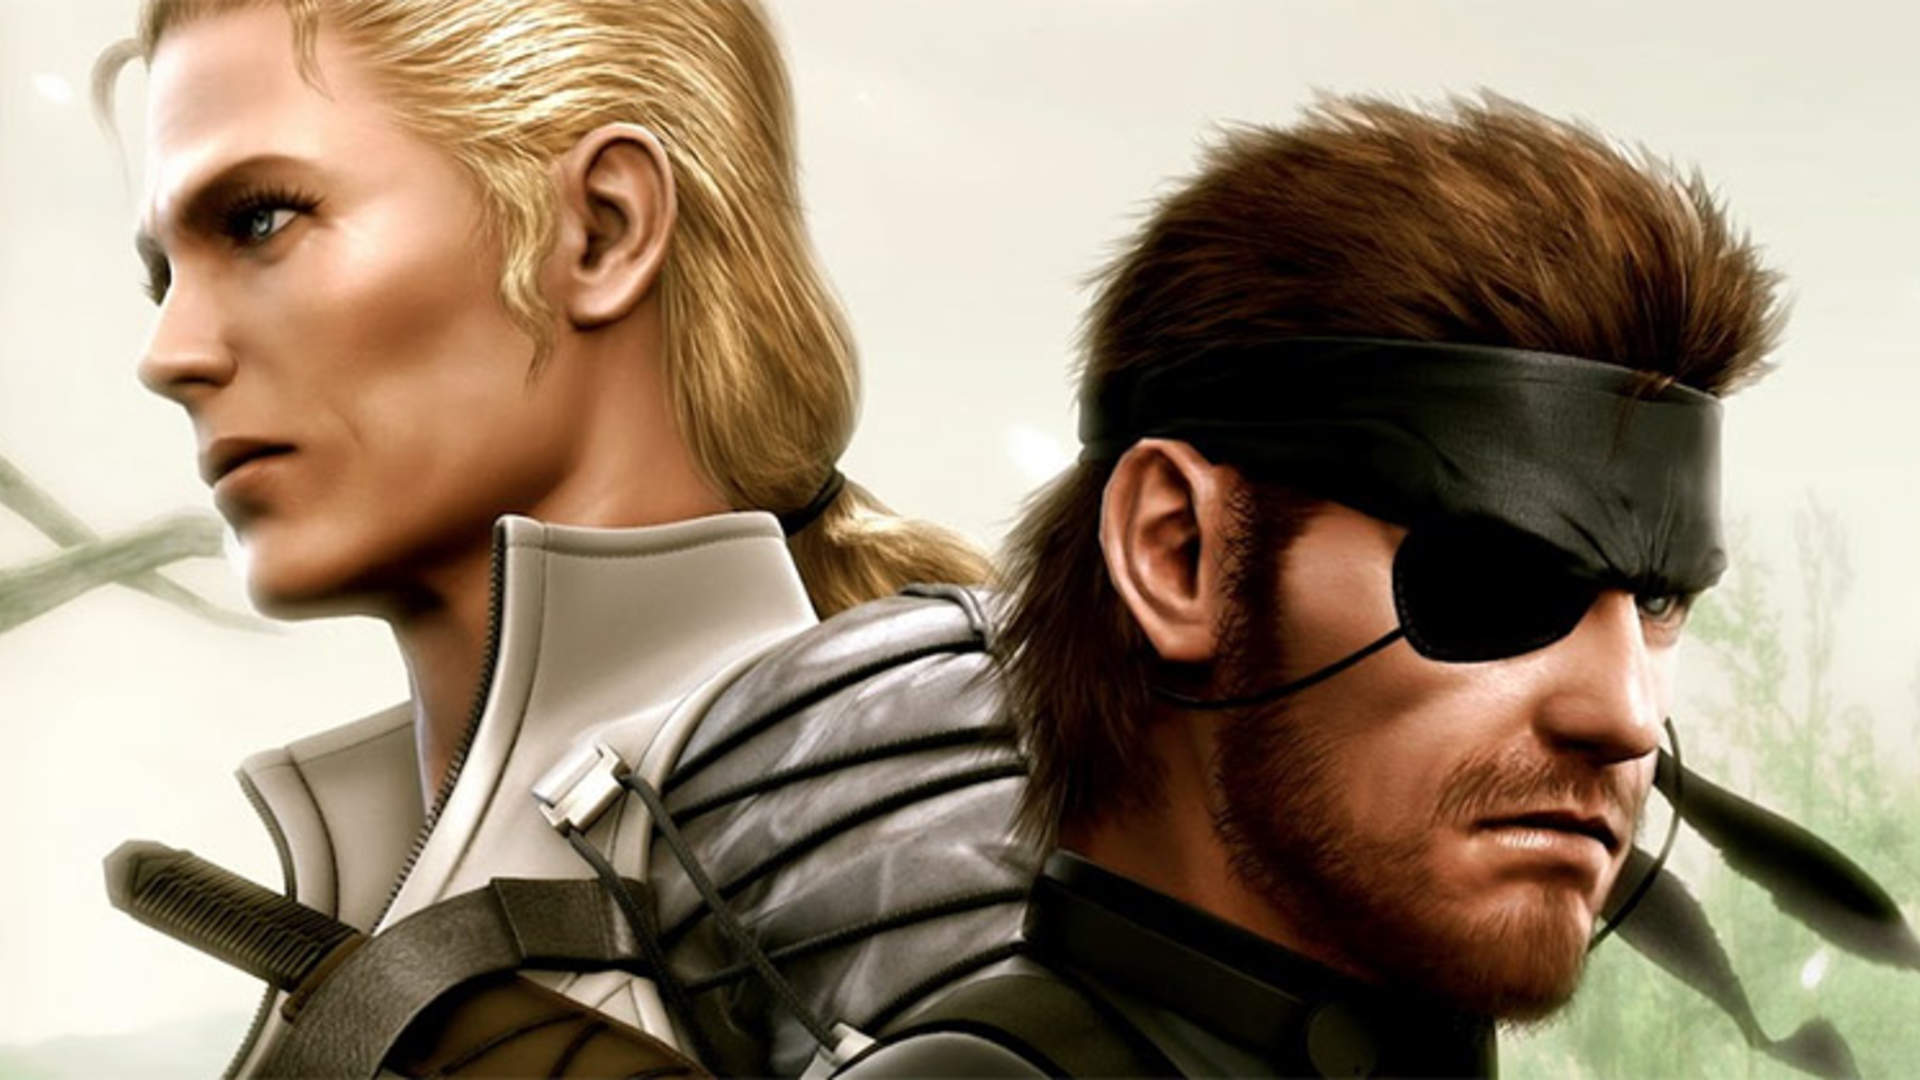 A new Metal Gear game supposedly in the works by Konami.